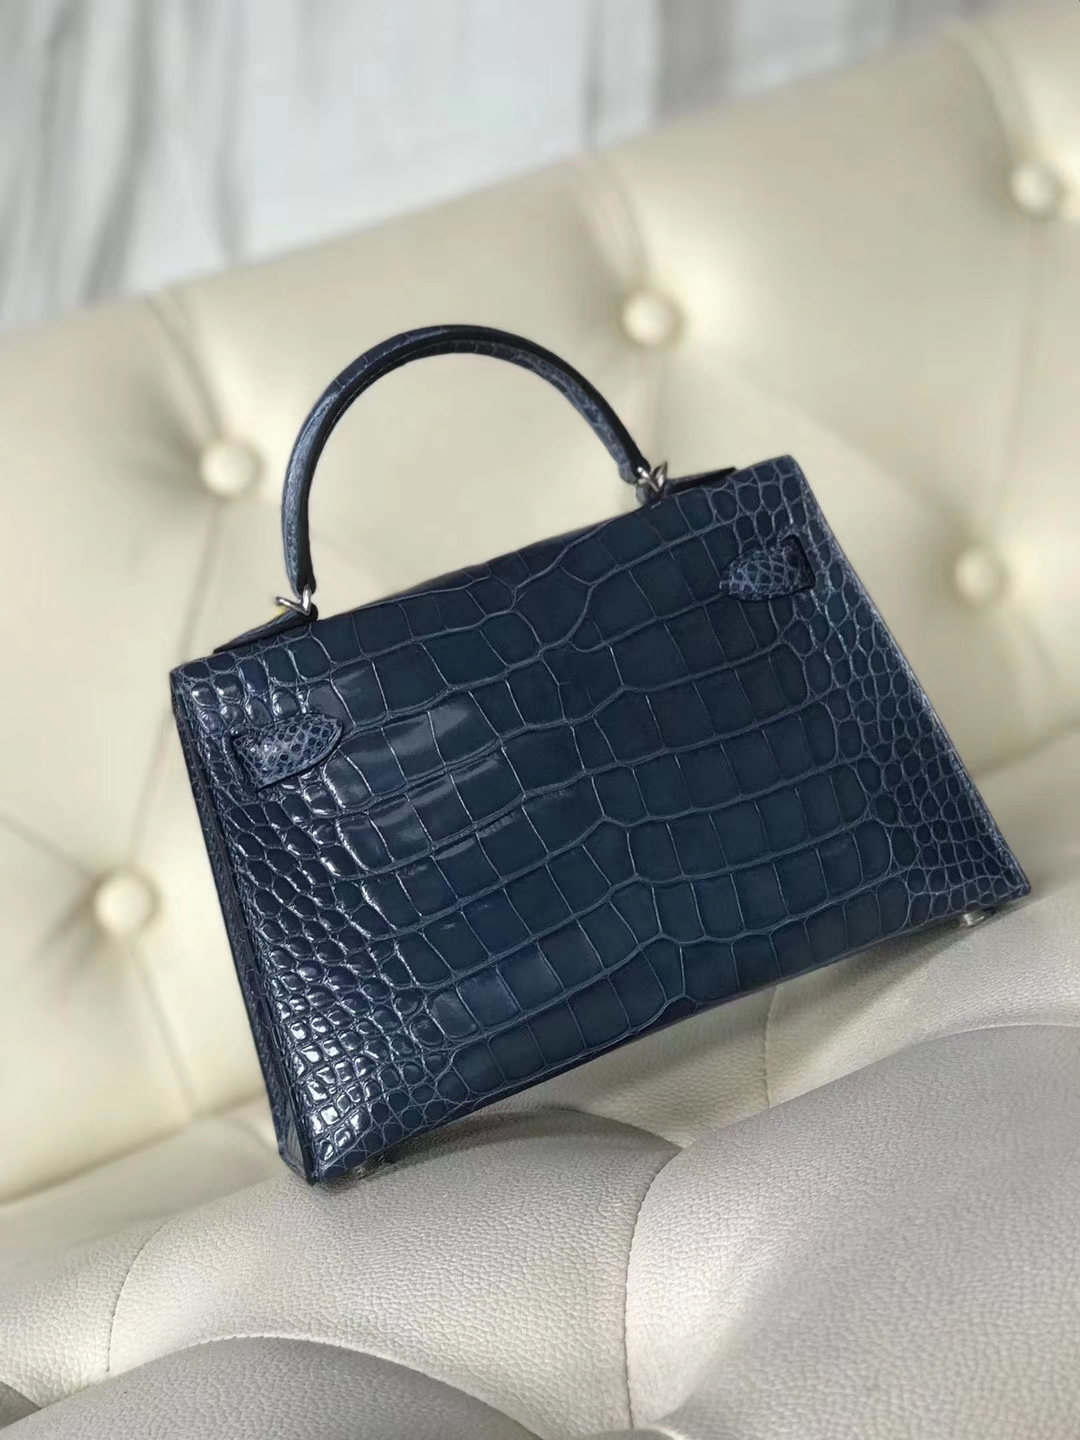 New Arrival Hermes Shiny Crocodile Minikelly-2 Evening Bag in 7N Blue Tempete